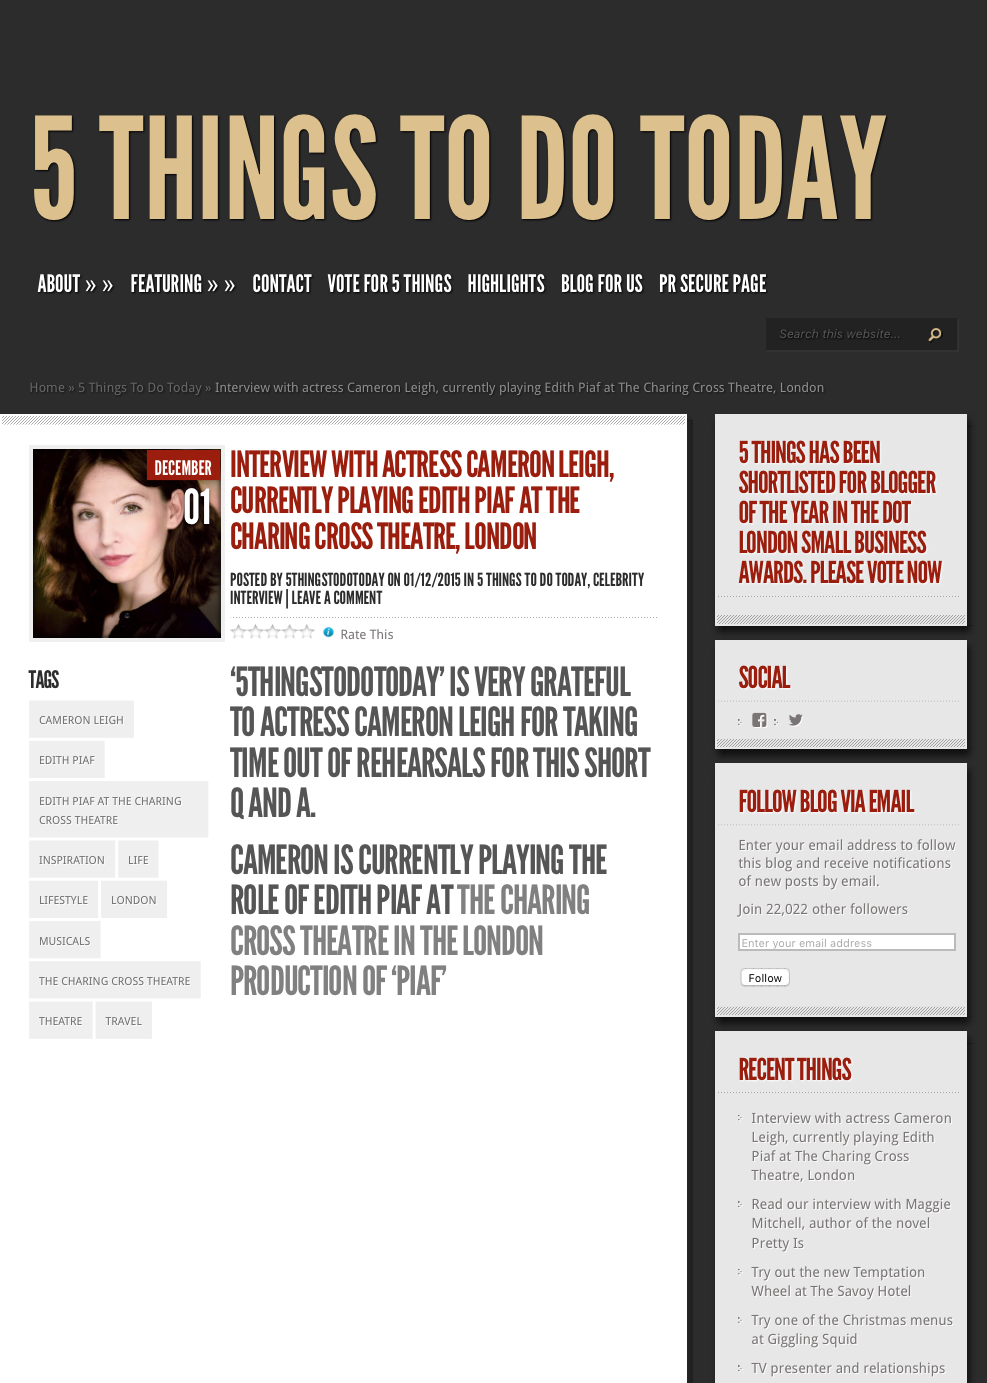 Interview with actress Cameron Leigh, currently playing Edith Piaf at the Charing Cross Theatre, London